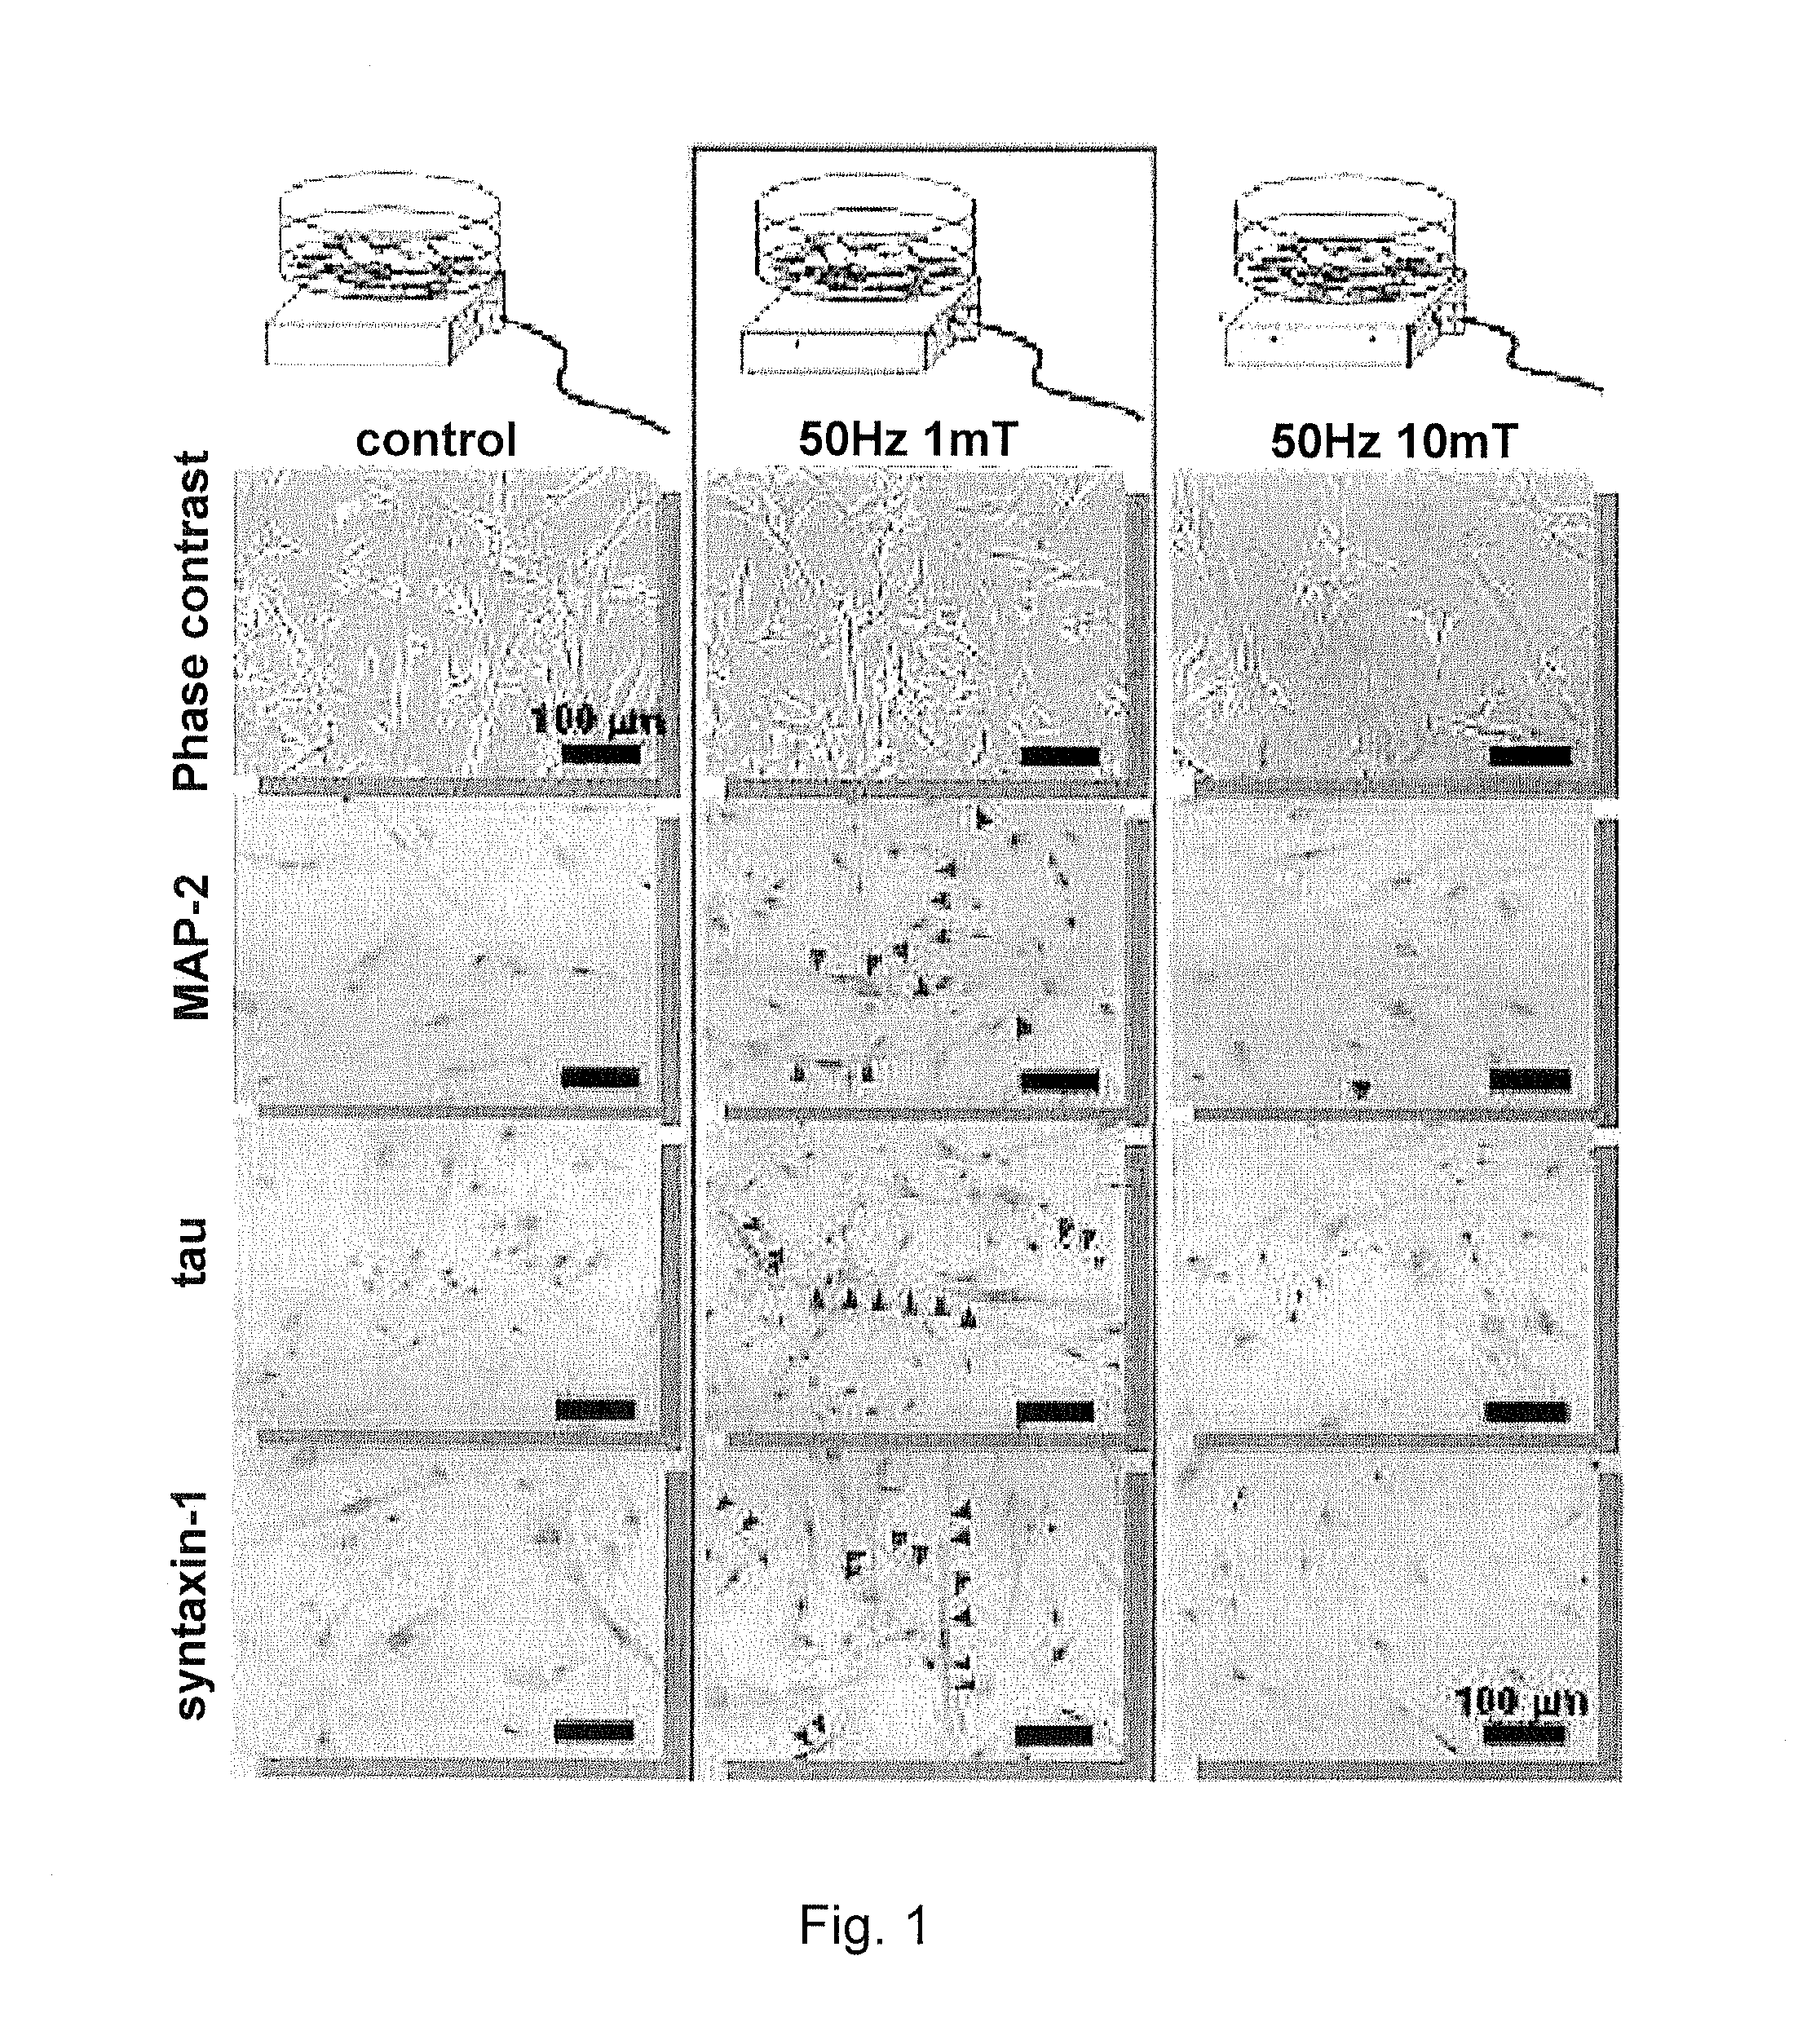 Method for inducing differentiation of adult stem cells and nerve cells using electromagnetic field